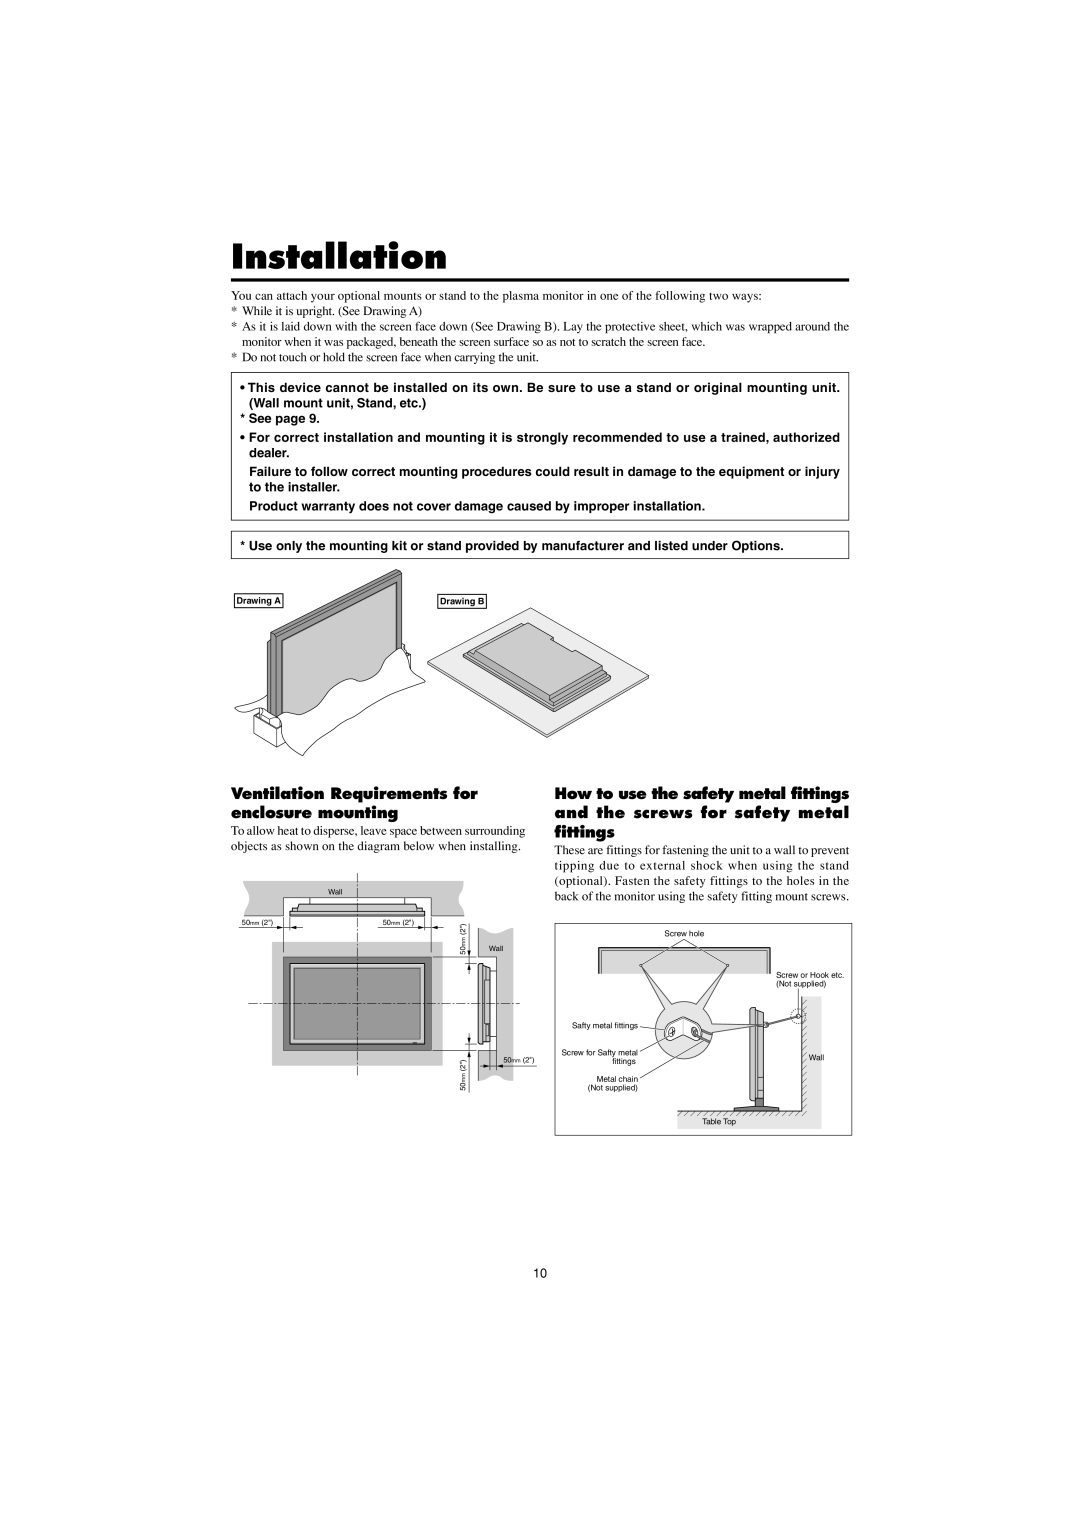 Marantz PD6150D manual Installation, Ventilation Requirements for enclosure mounting, See page 